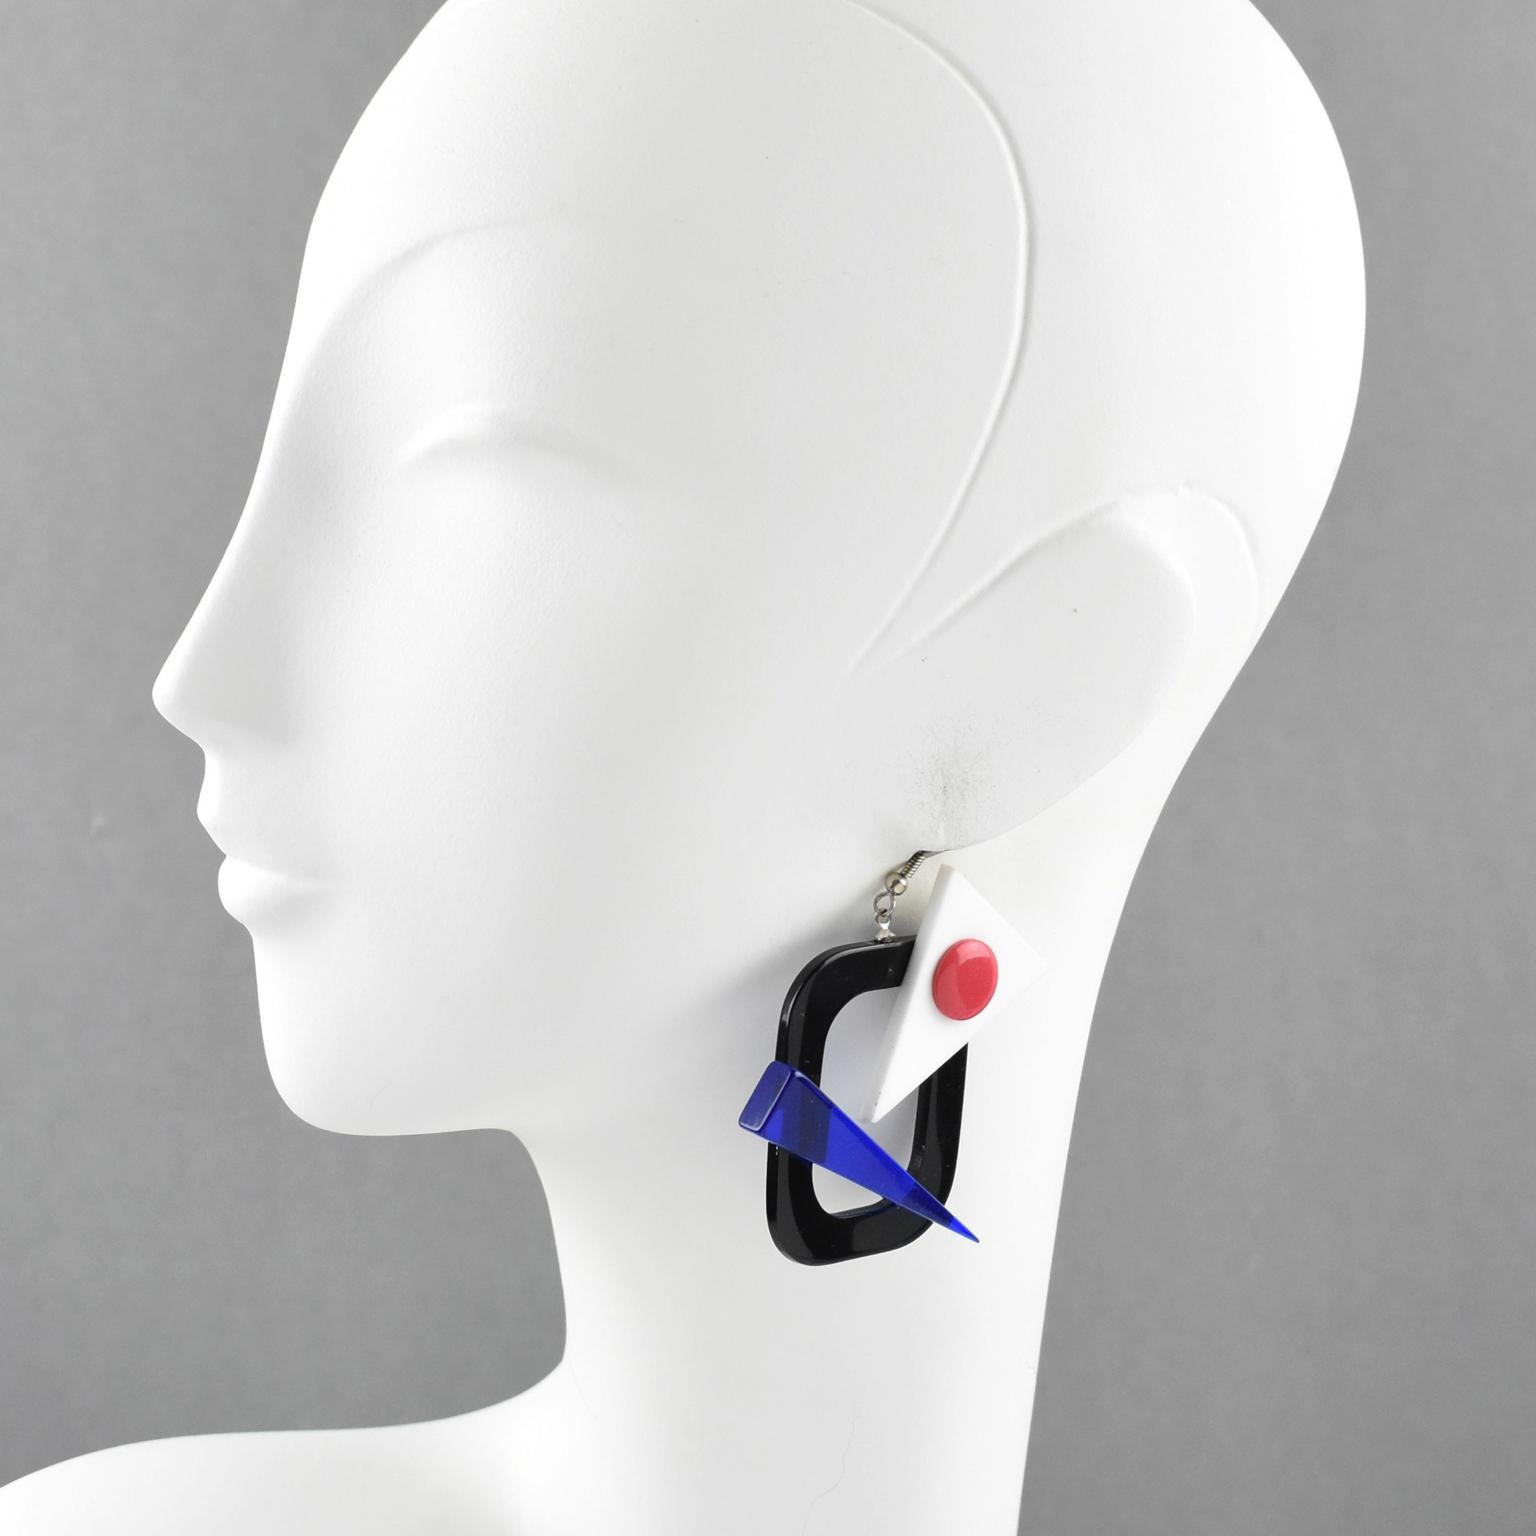 Stunning Italian Studio Memphis style oversized pierced earrings. Featuring all hand-made primary colors Lucite with geometric and see thru carving. Assorted tones of white, black, red and transparent blue. No visible signature. For pierced